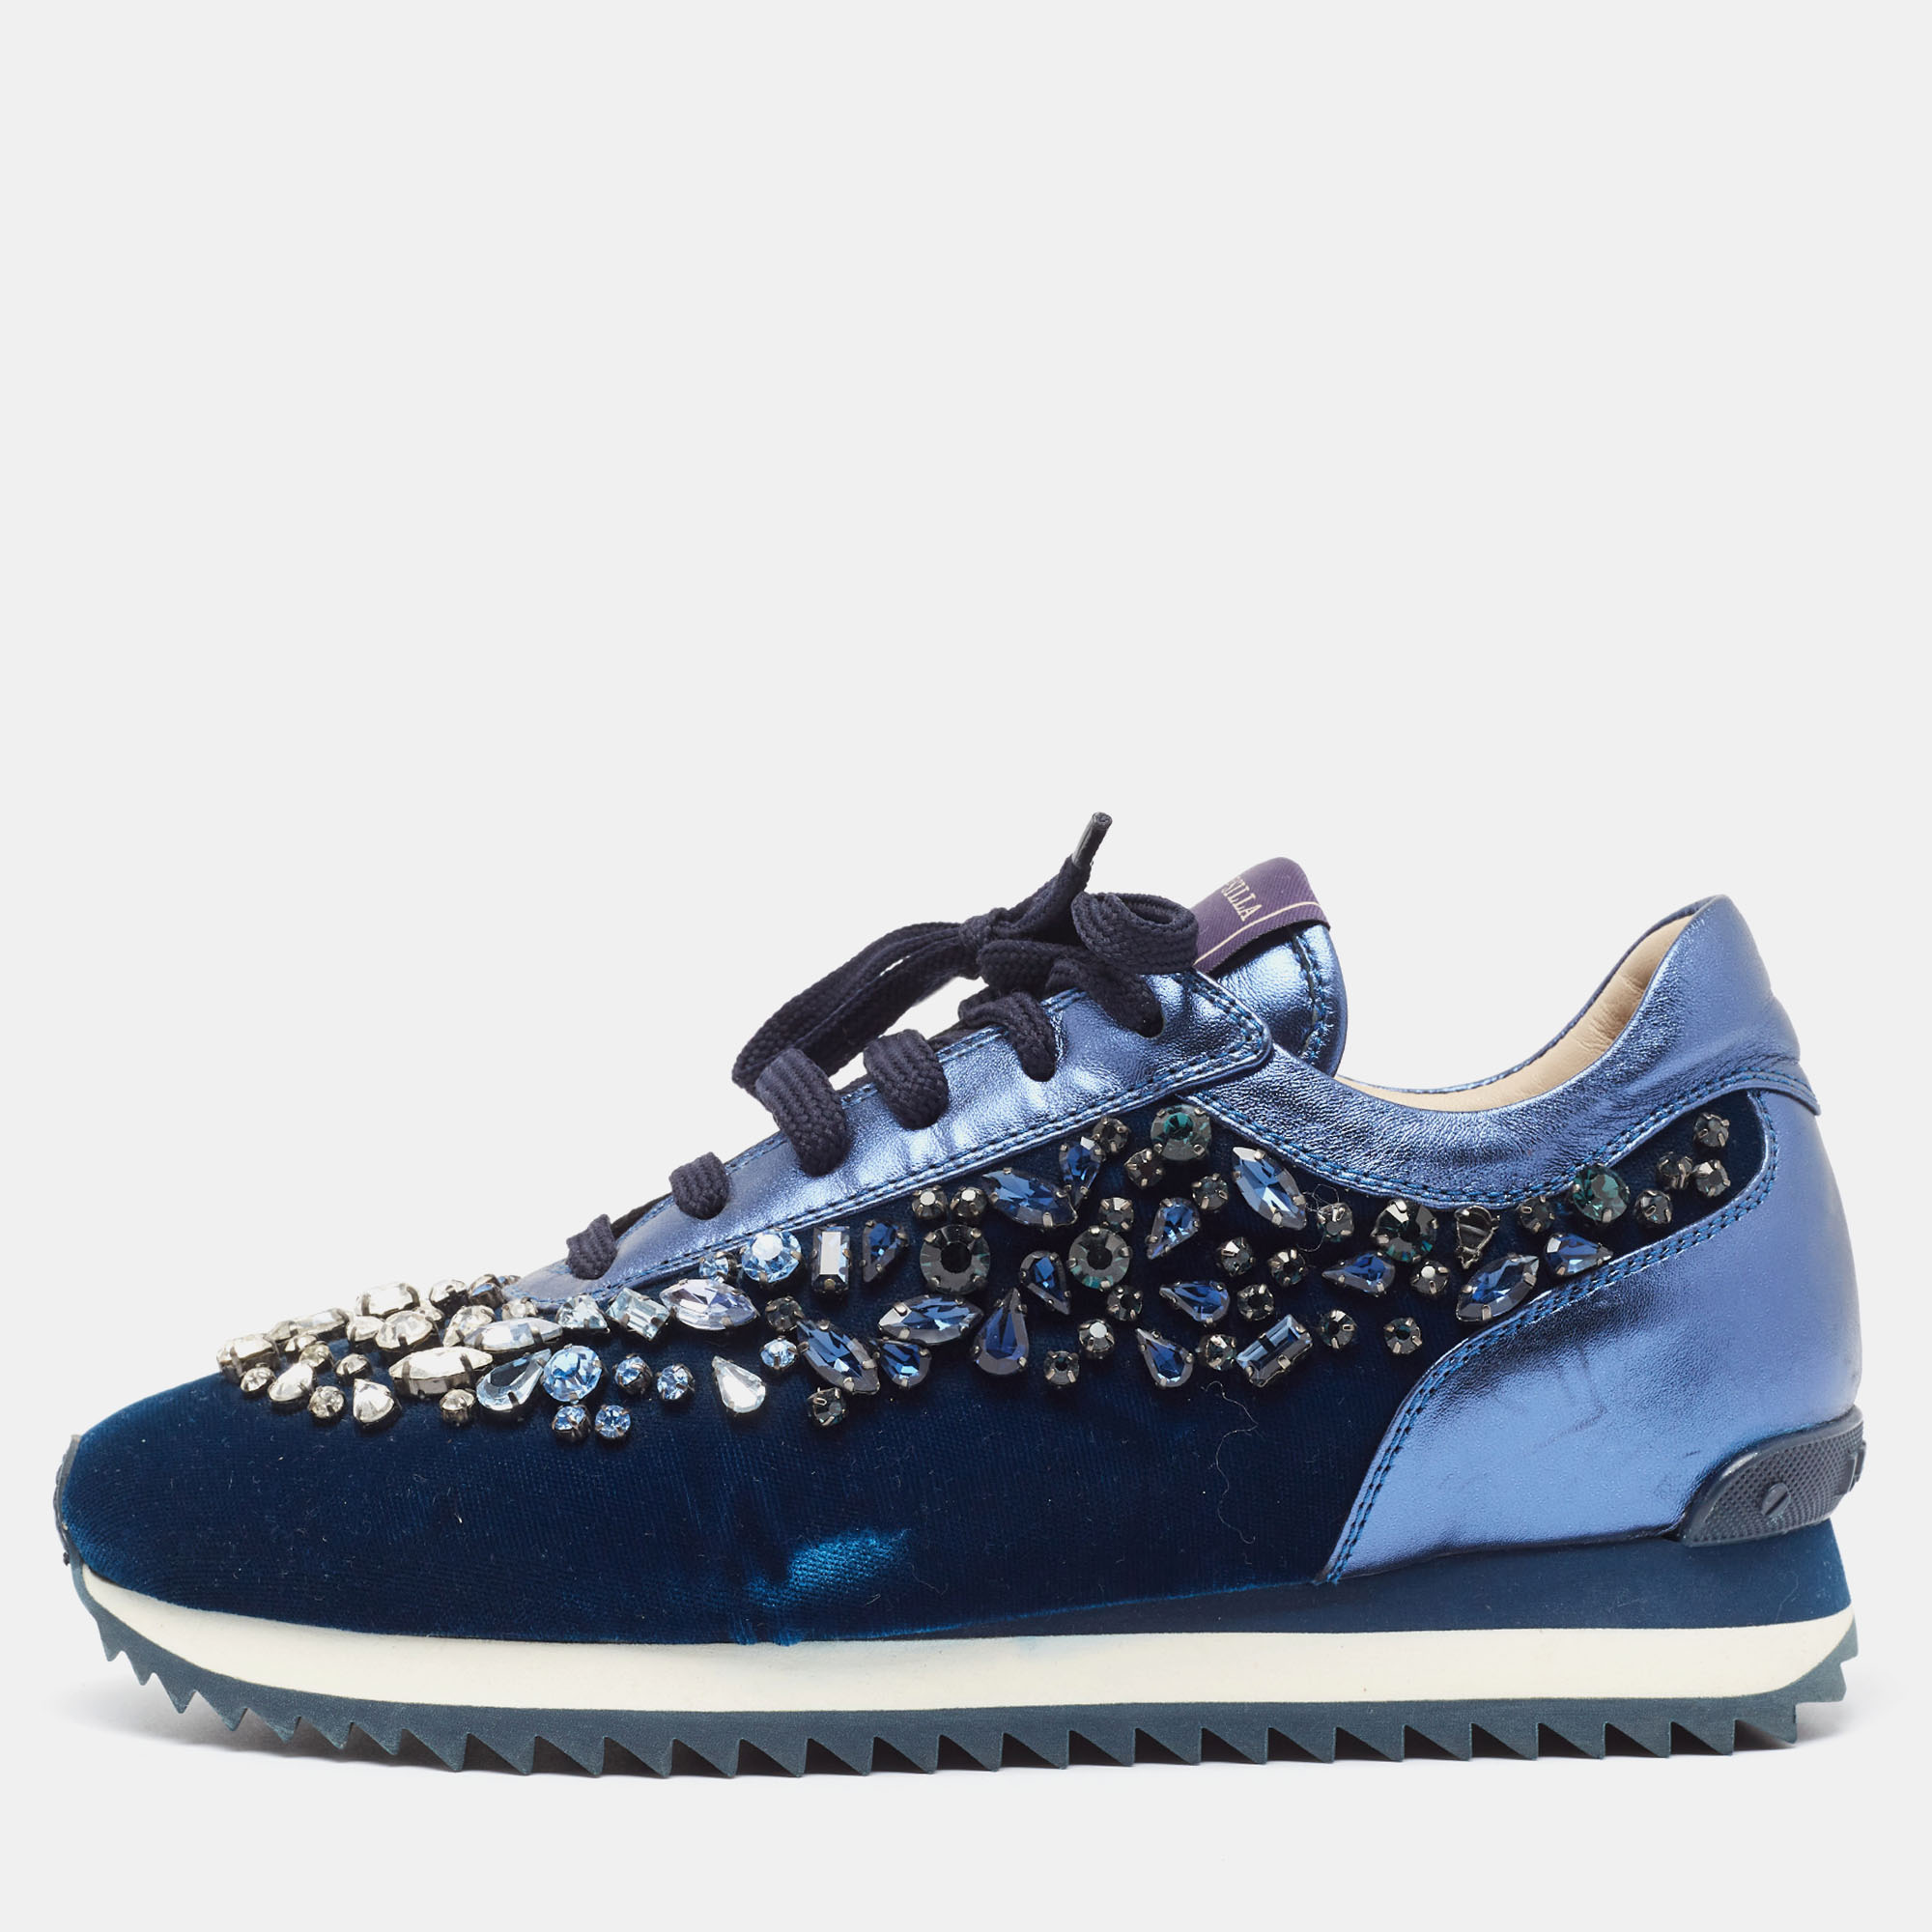 These sneakers from Le Silla are super sturdy stunning and stylish. They are crafted from navy blue leather and velvet into a low top silhouette. Embellished with crystals they showcase lace up fastenings and gunmetal tone hardware on the vamps. Add these trendy sneakers to your collection now